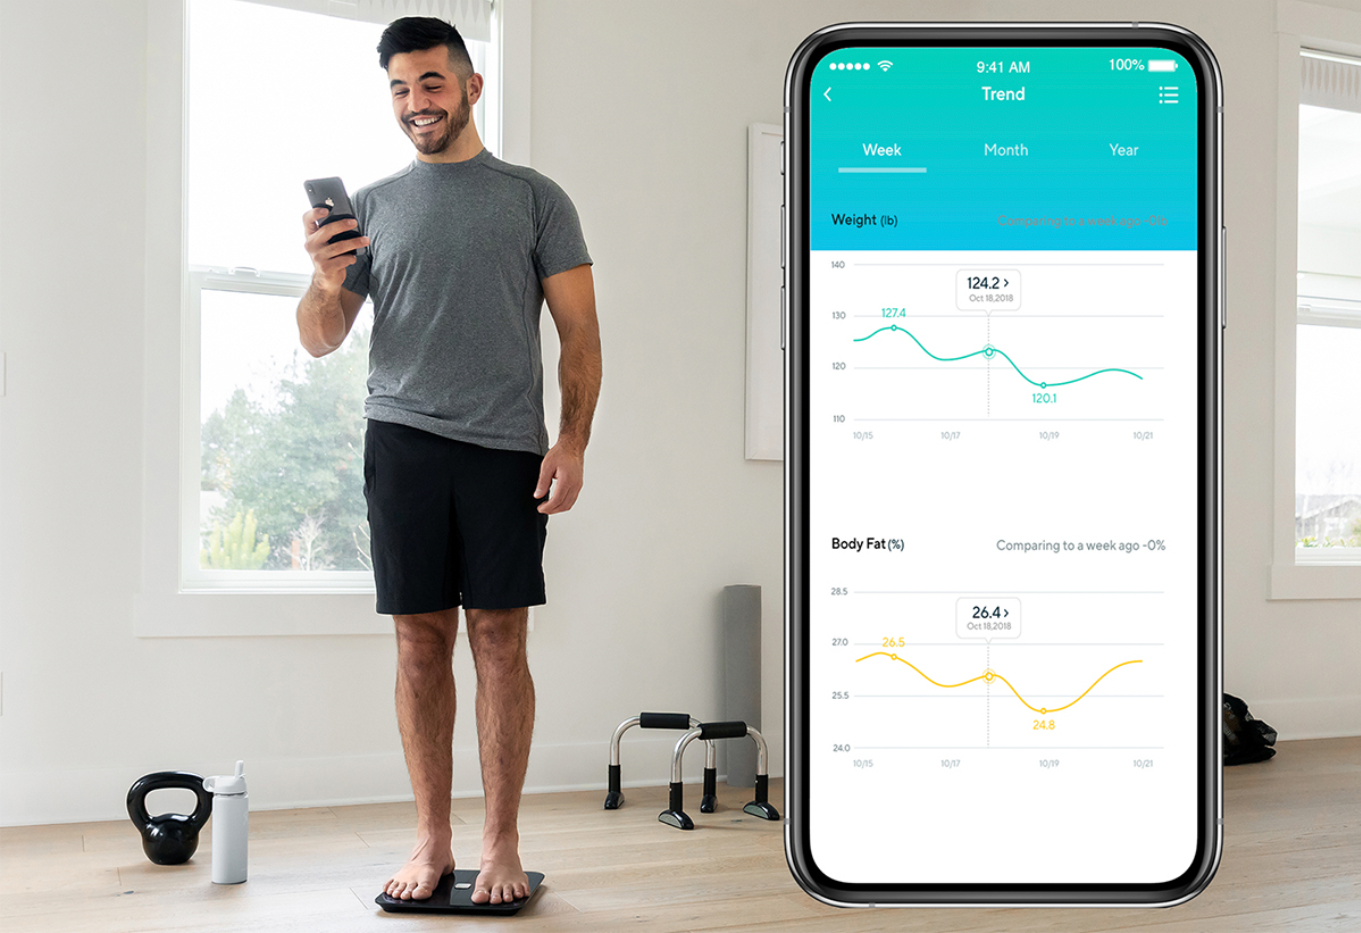 Wyze Launched Its New Smart Band & Smart Scale Today At Under $25